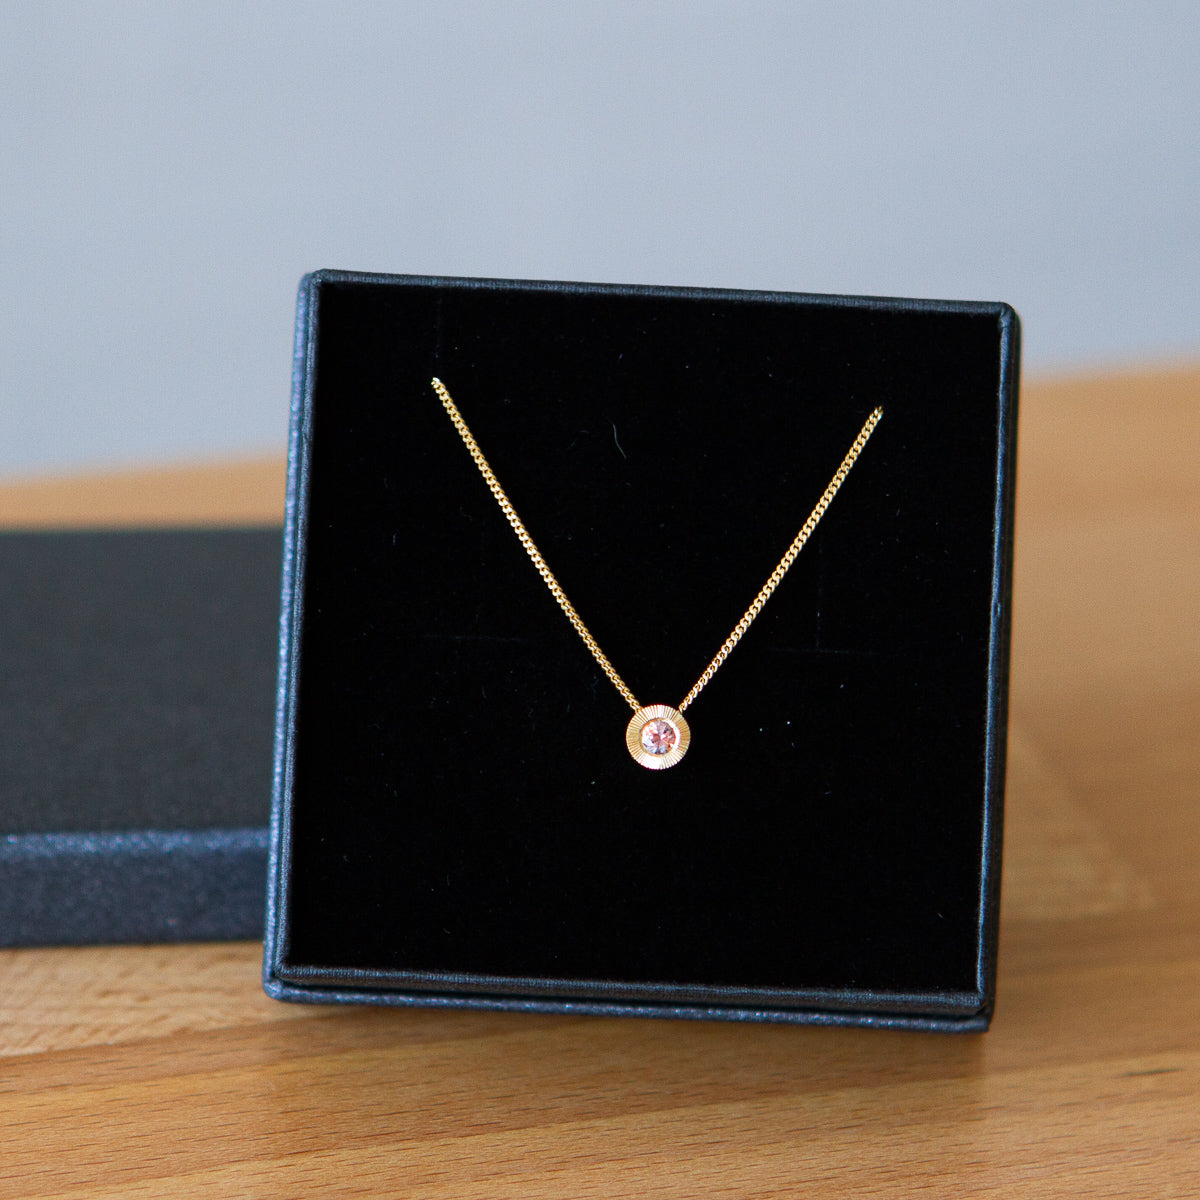 14k yellow gold small Aurora necklace with pink Montana sapphire center in a gift box